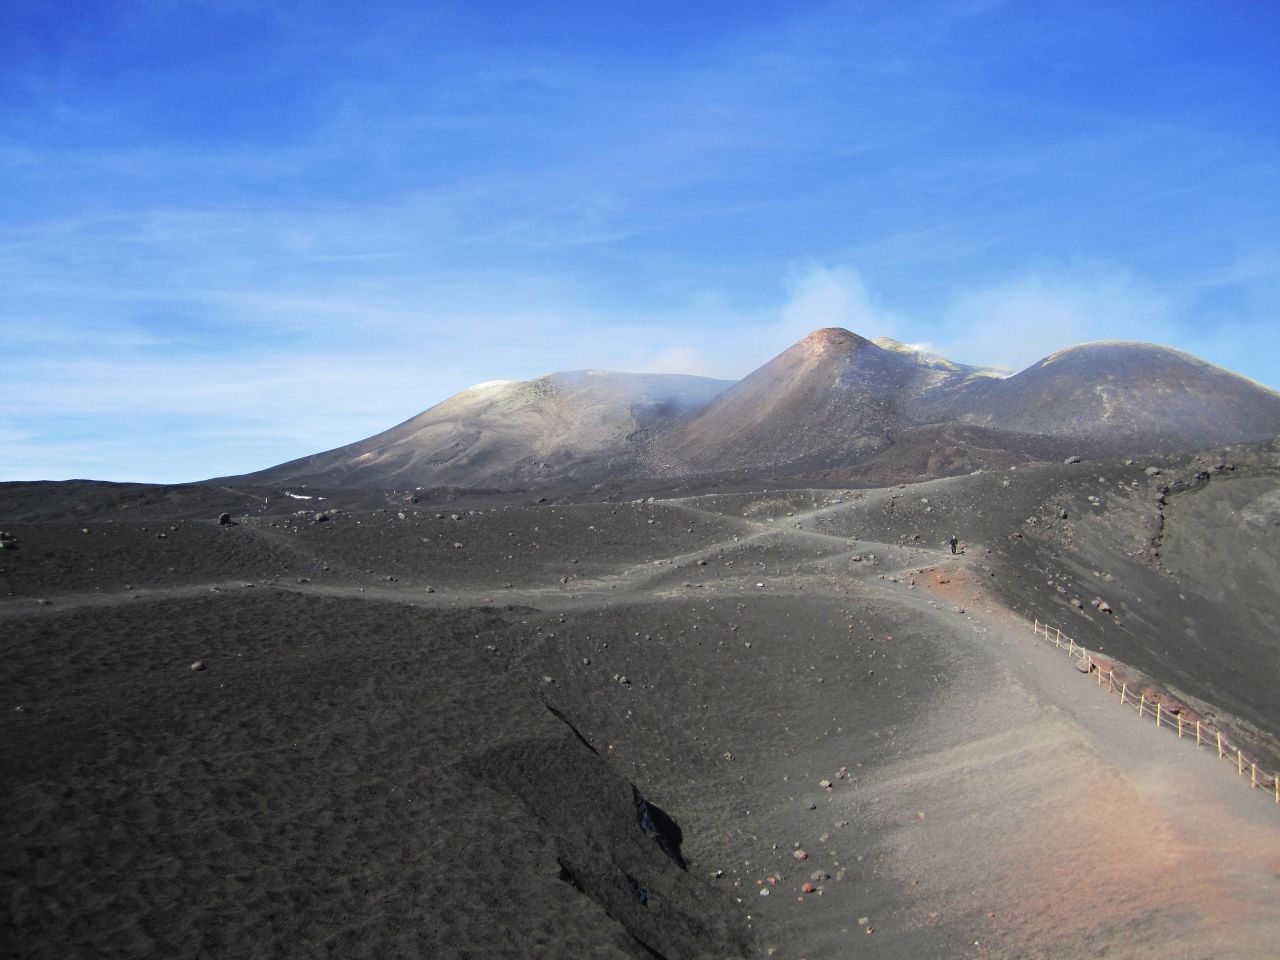 A view from 2,800 meters up the mountain, looking toward the peak of Mount Etna. The top of the volcano is actually a series of craters. Because it erupts frequently, Etna's landscape is constantly changing. These images were taken just a few days before the most recent eruption on October 26, 2013.